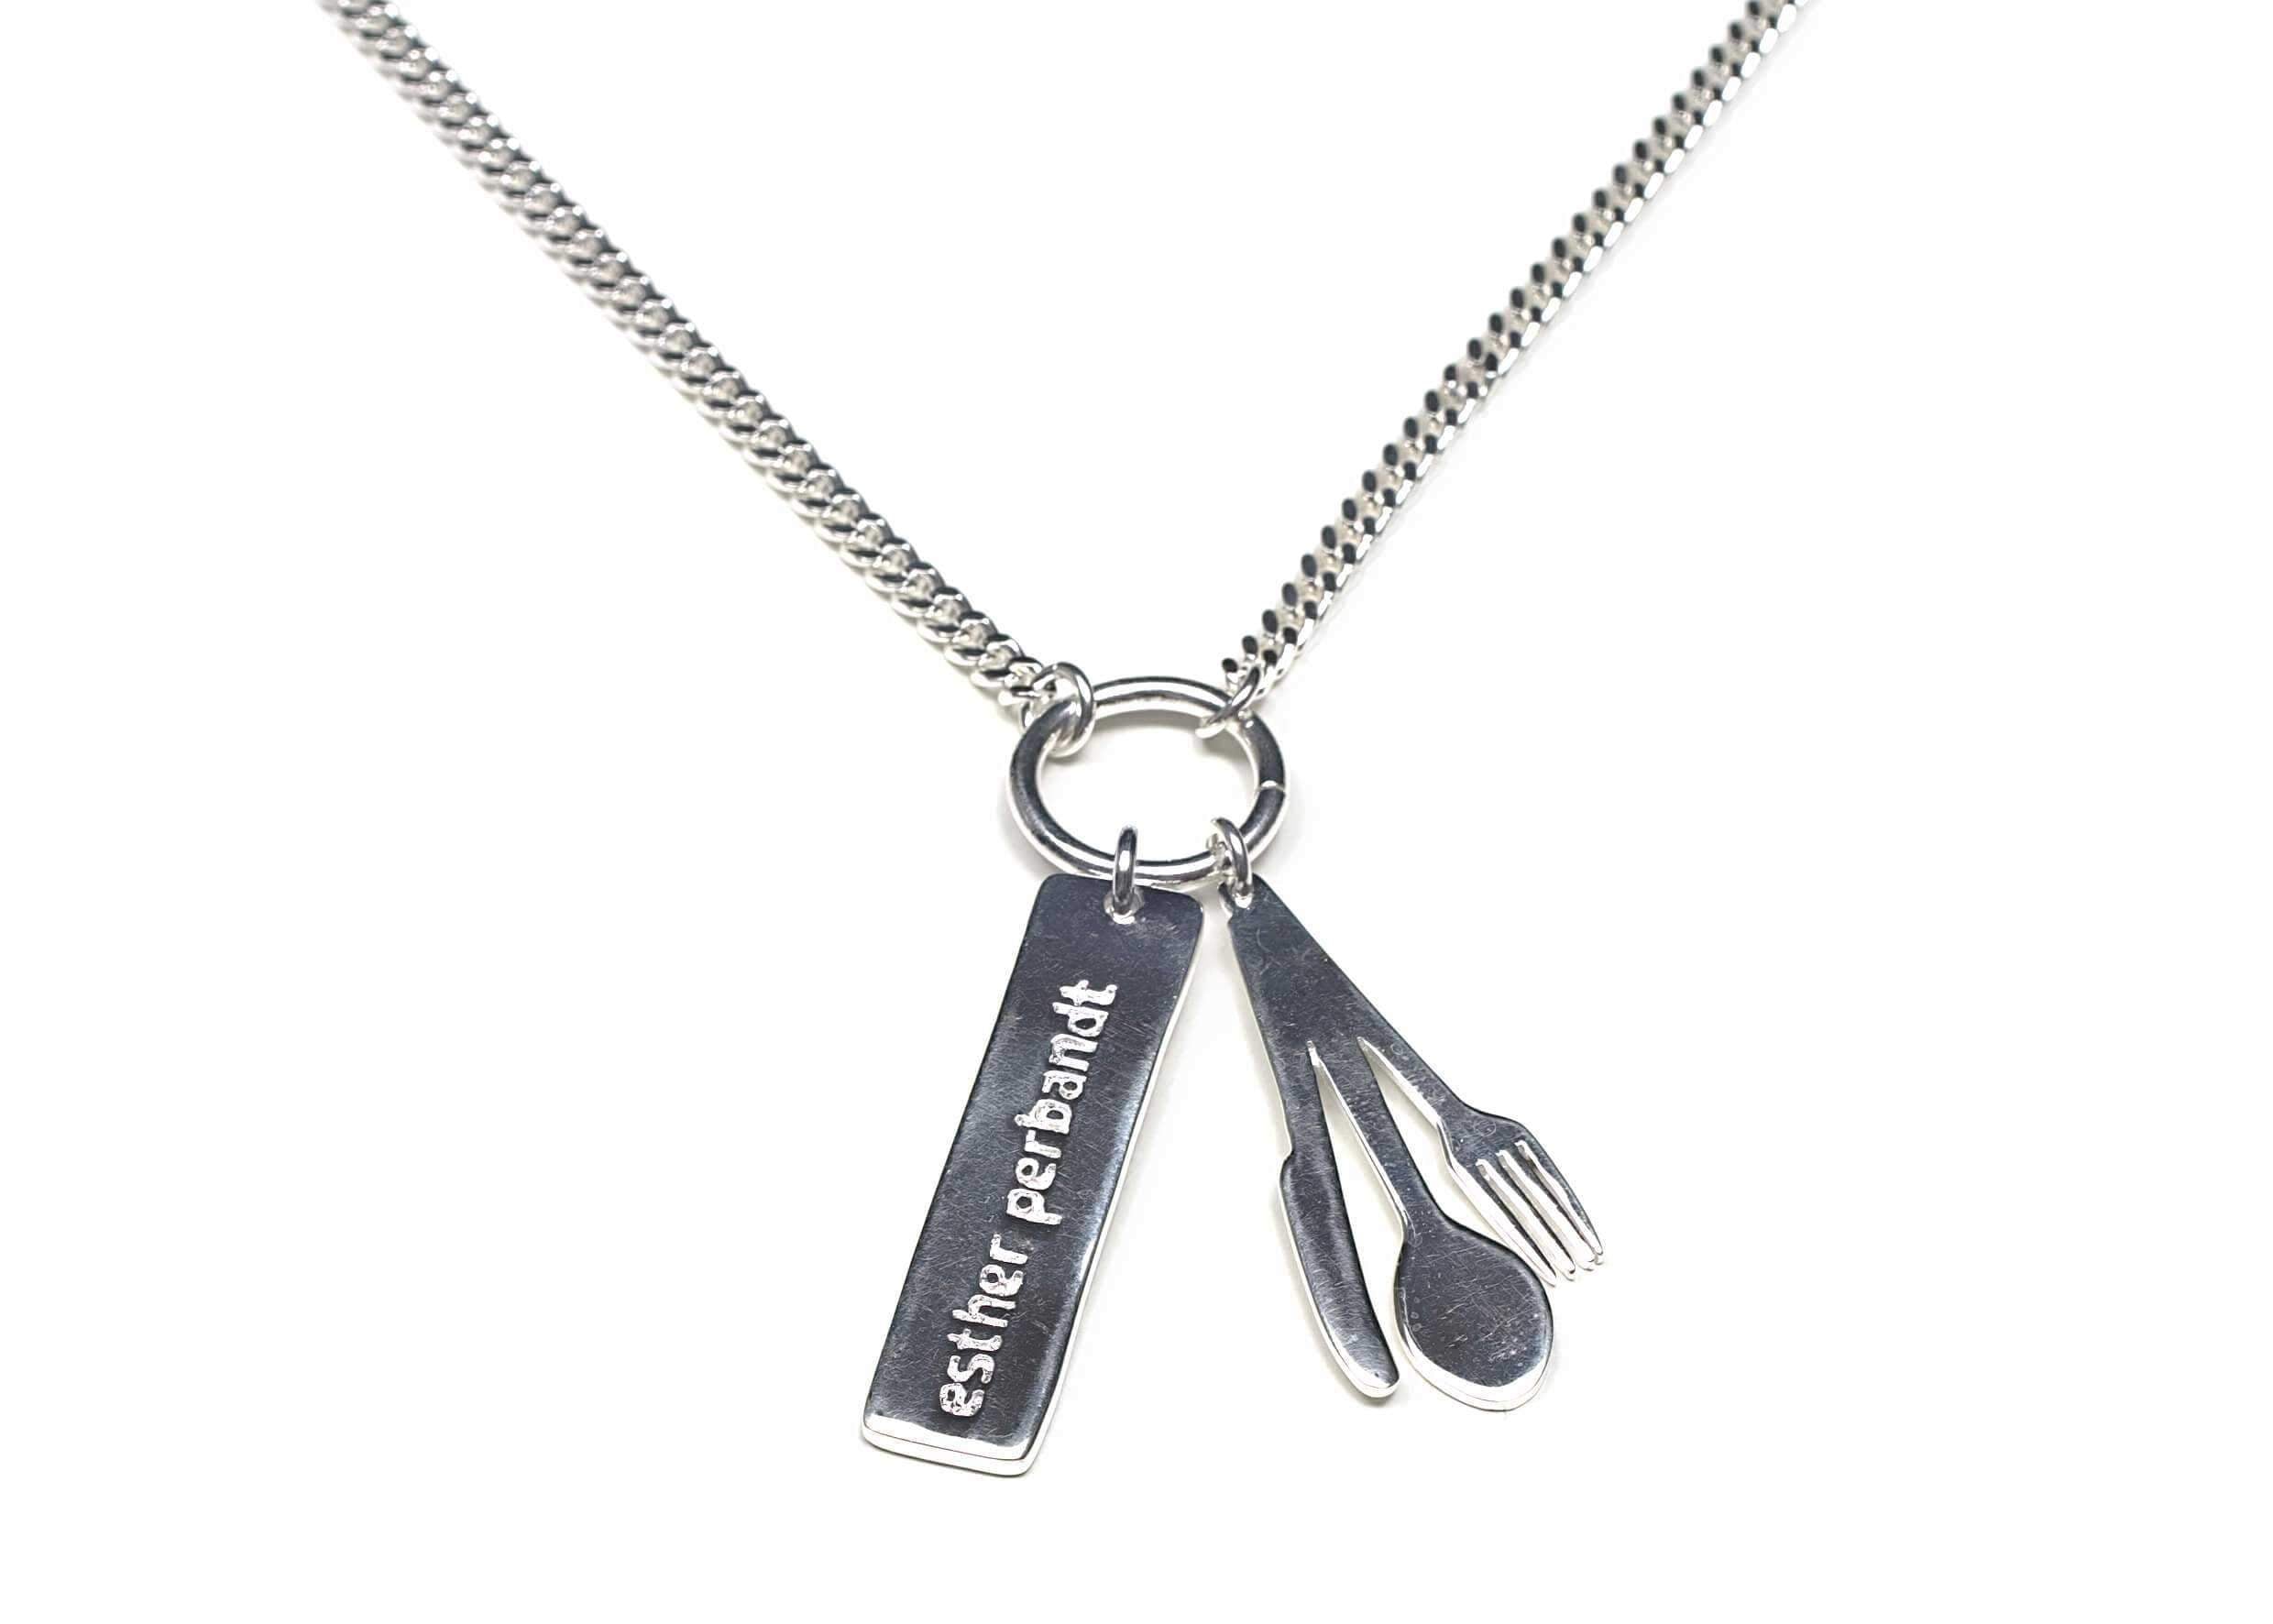 HUNGRY FOR LIFE - Fine Silver Necklace | esther perbandt